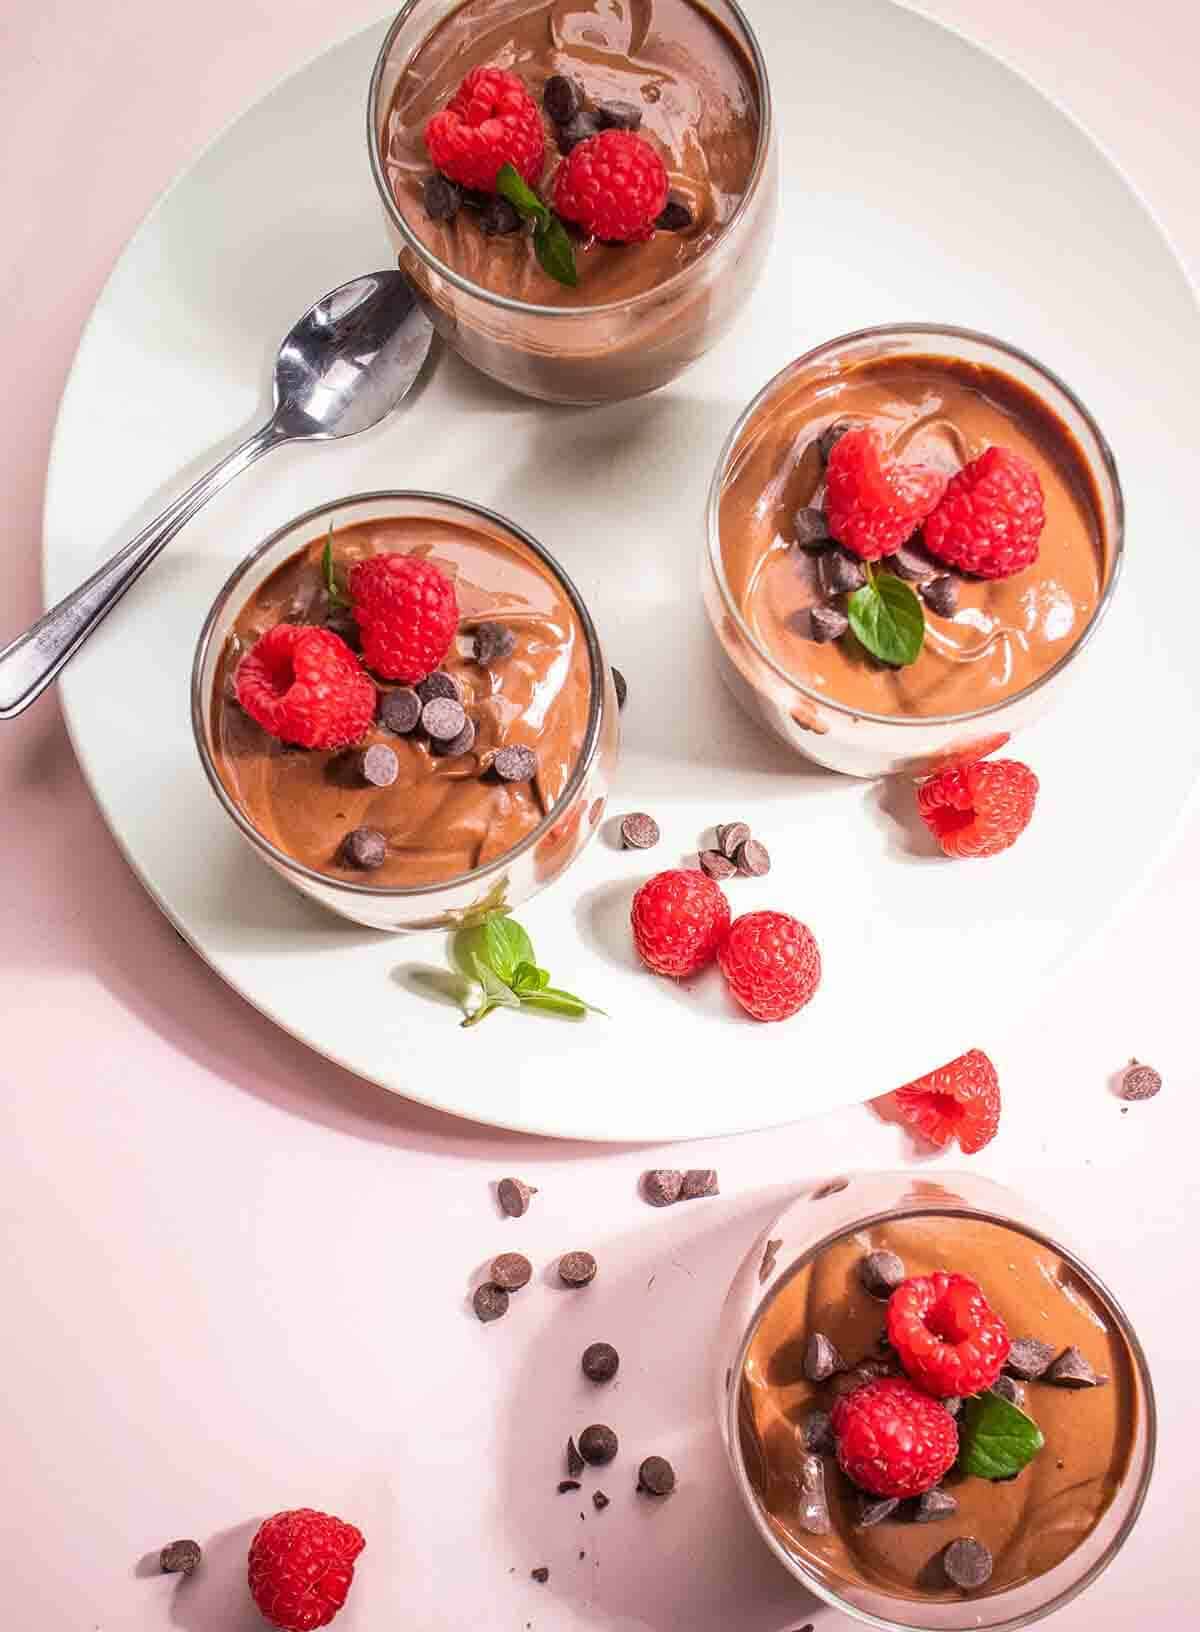 Easy gluten-free chocolate mousse with raspberries and chocolate chips.